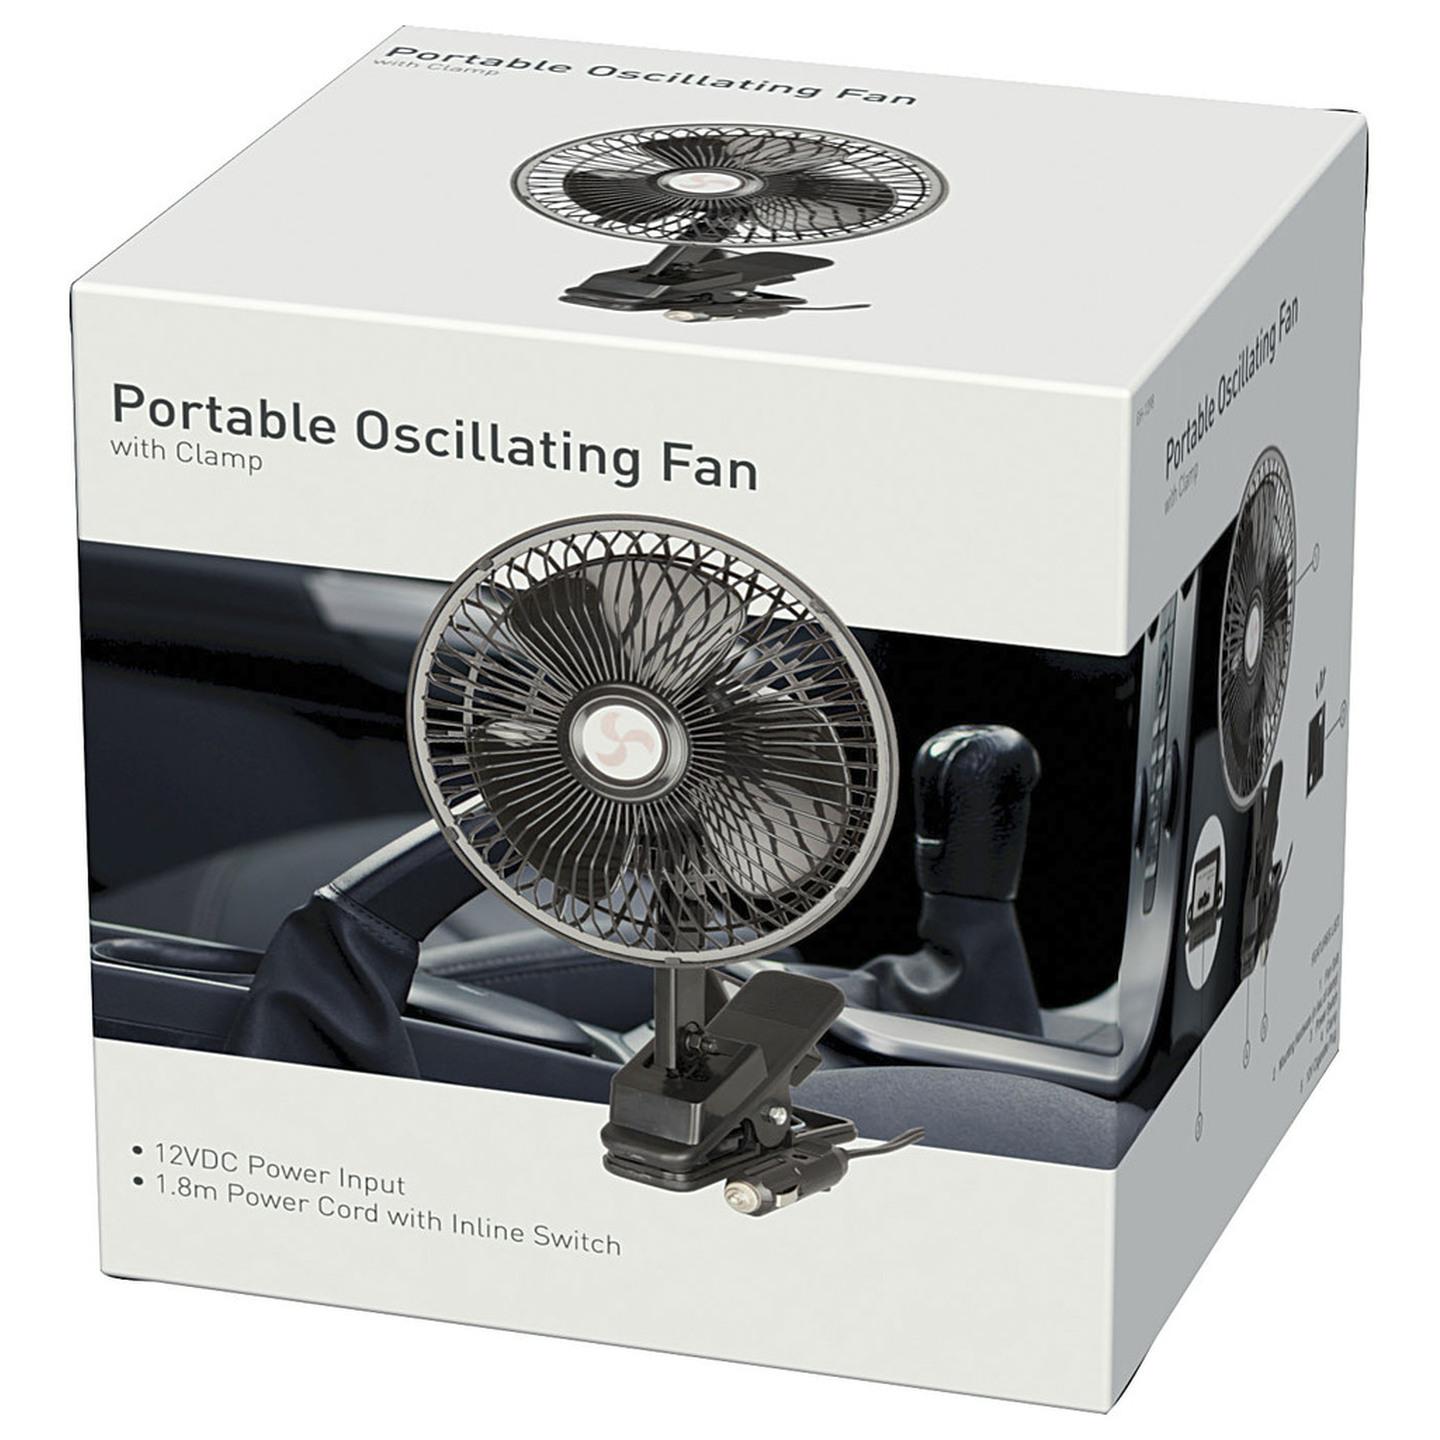 12VDC Oscillating Fan with Clamp